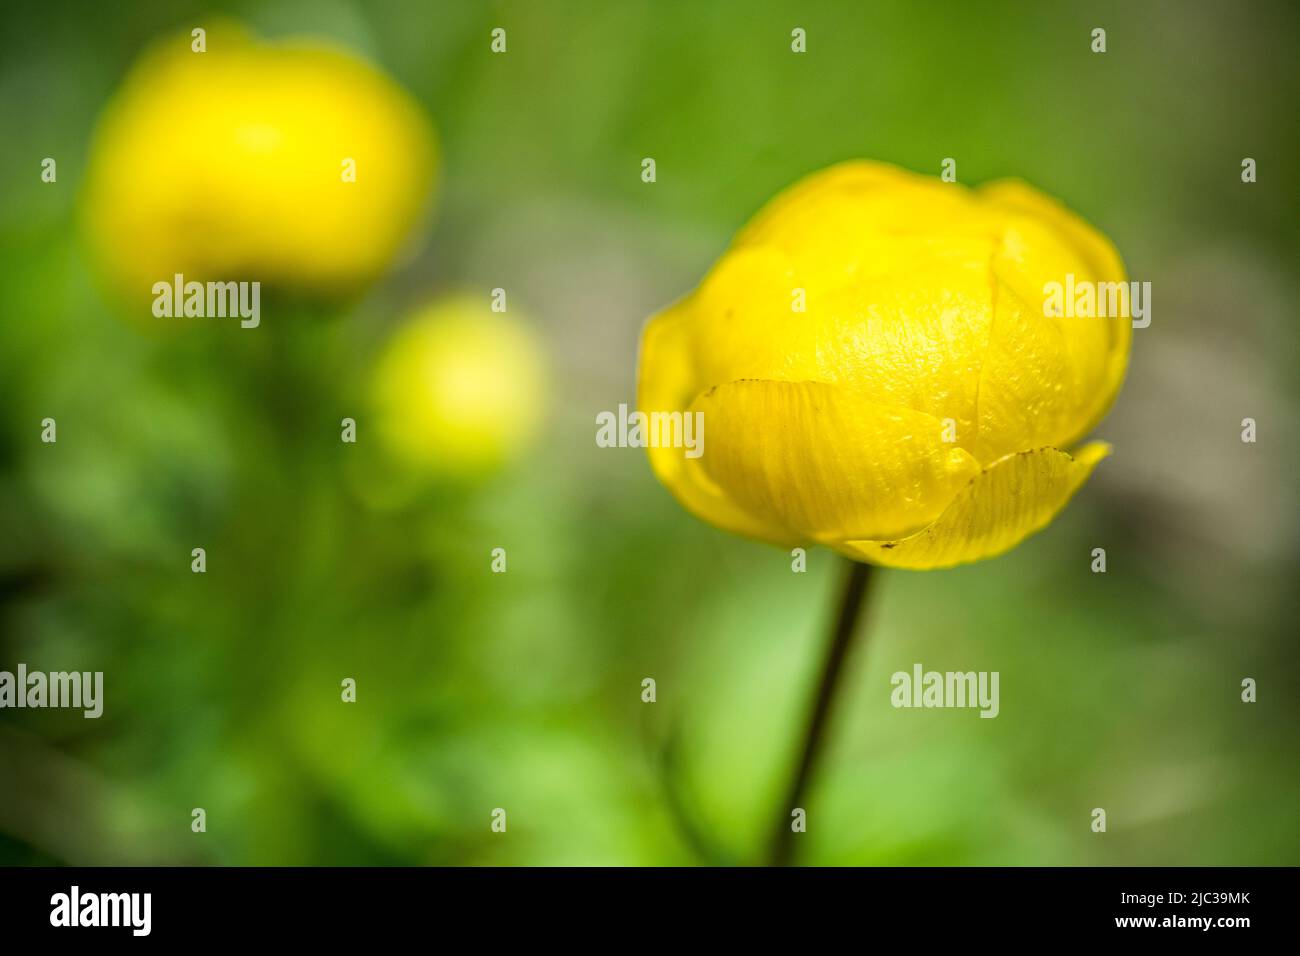 Trollius europaeus, the globeflower is a perennial flowering plant of the family Ranunculaceae. Stock Photo